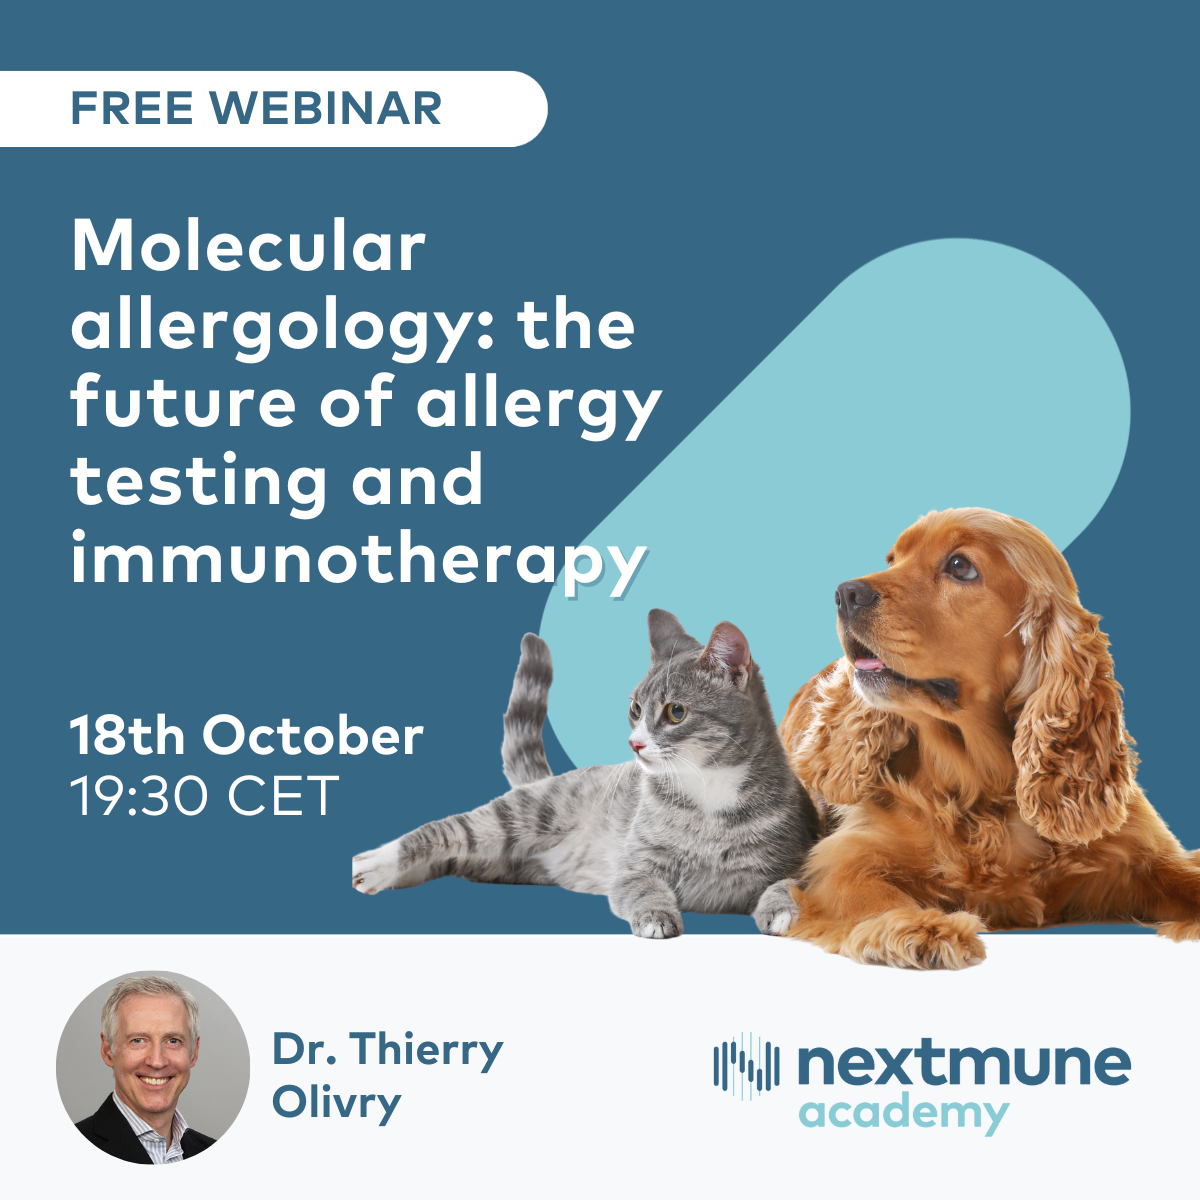 “Molecular allergology: the future of allergy testing and immunotherapy” - Dr. Thierry Olivry